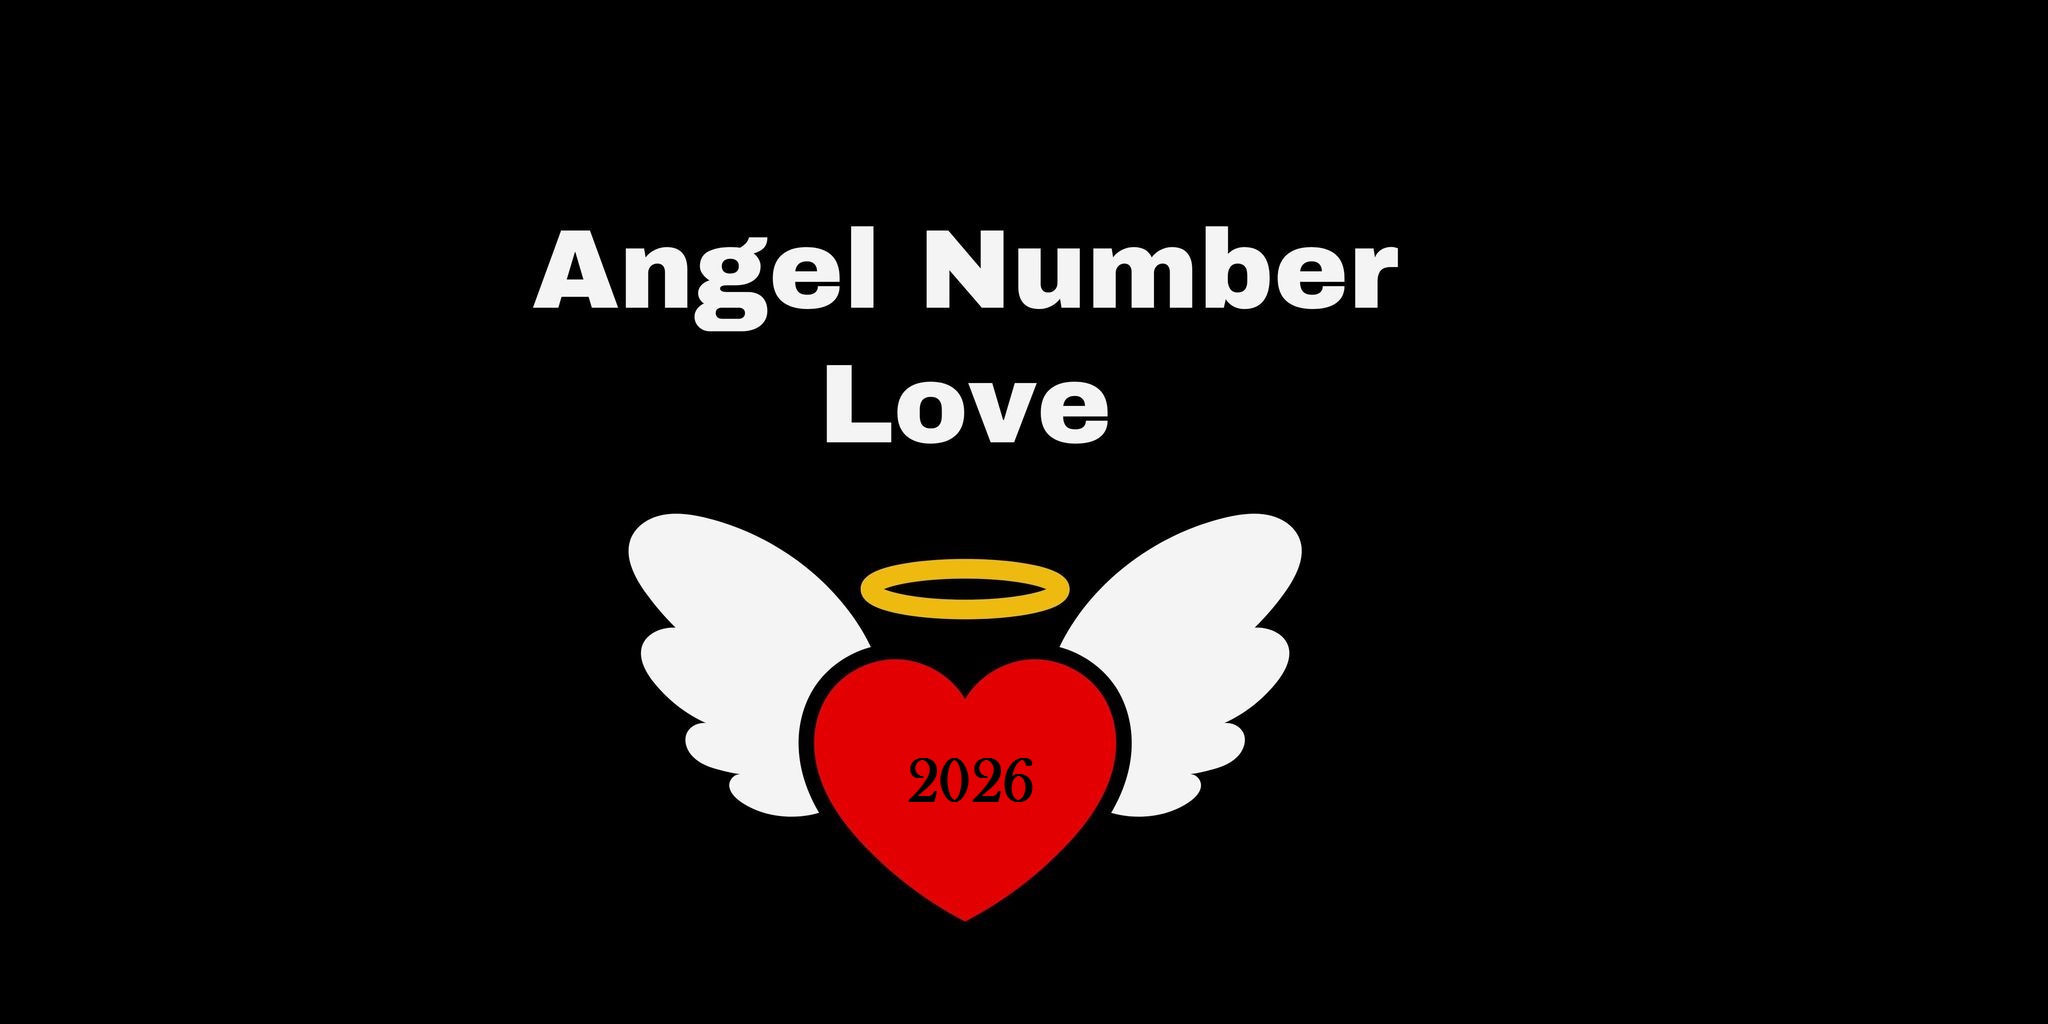 2026 Angel Number Meaning In Love